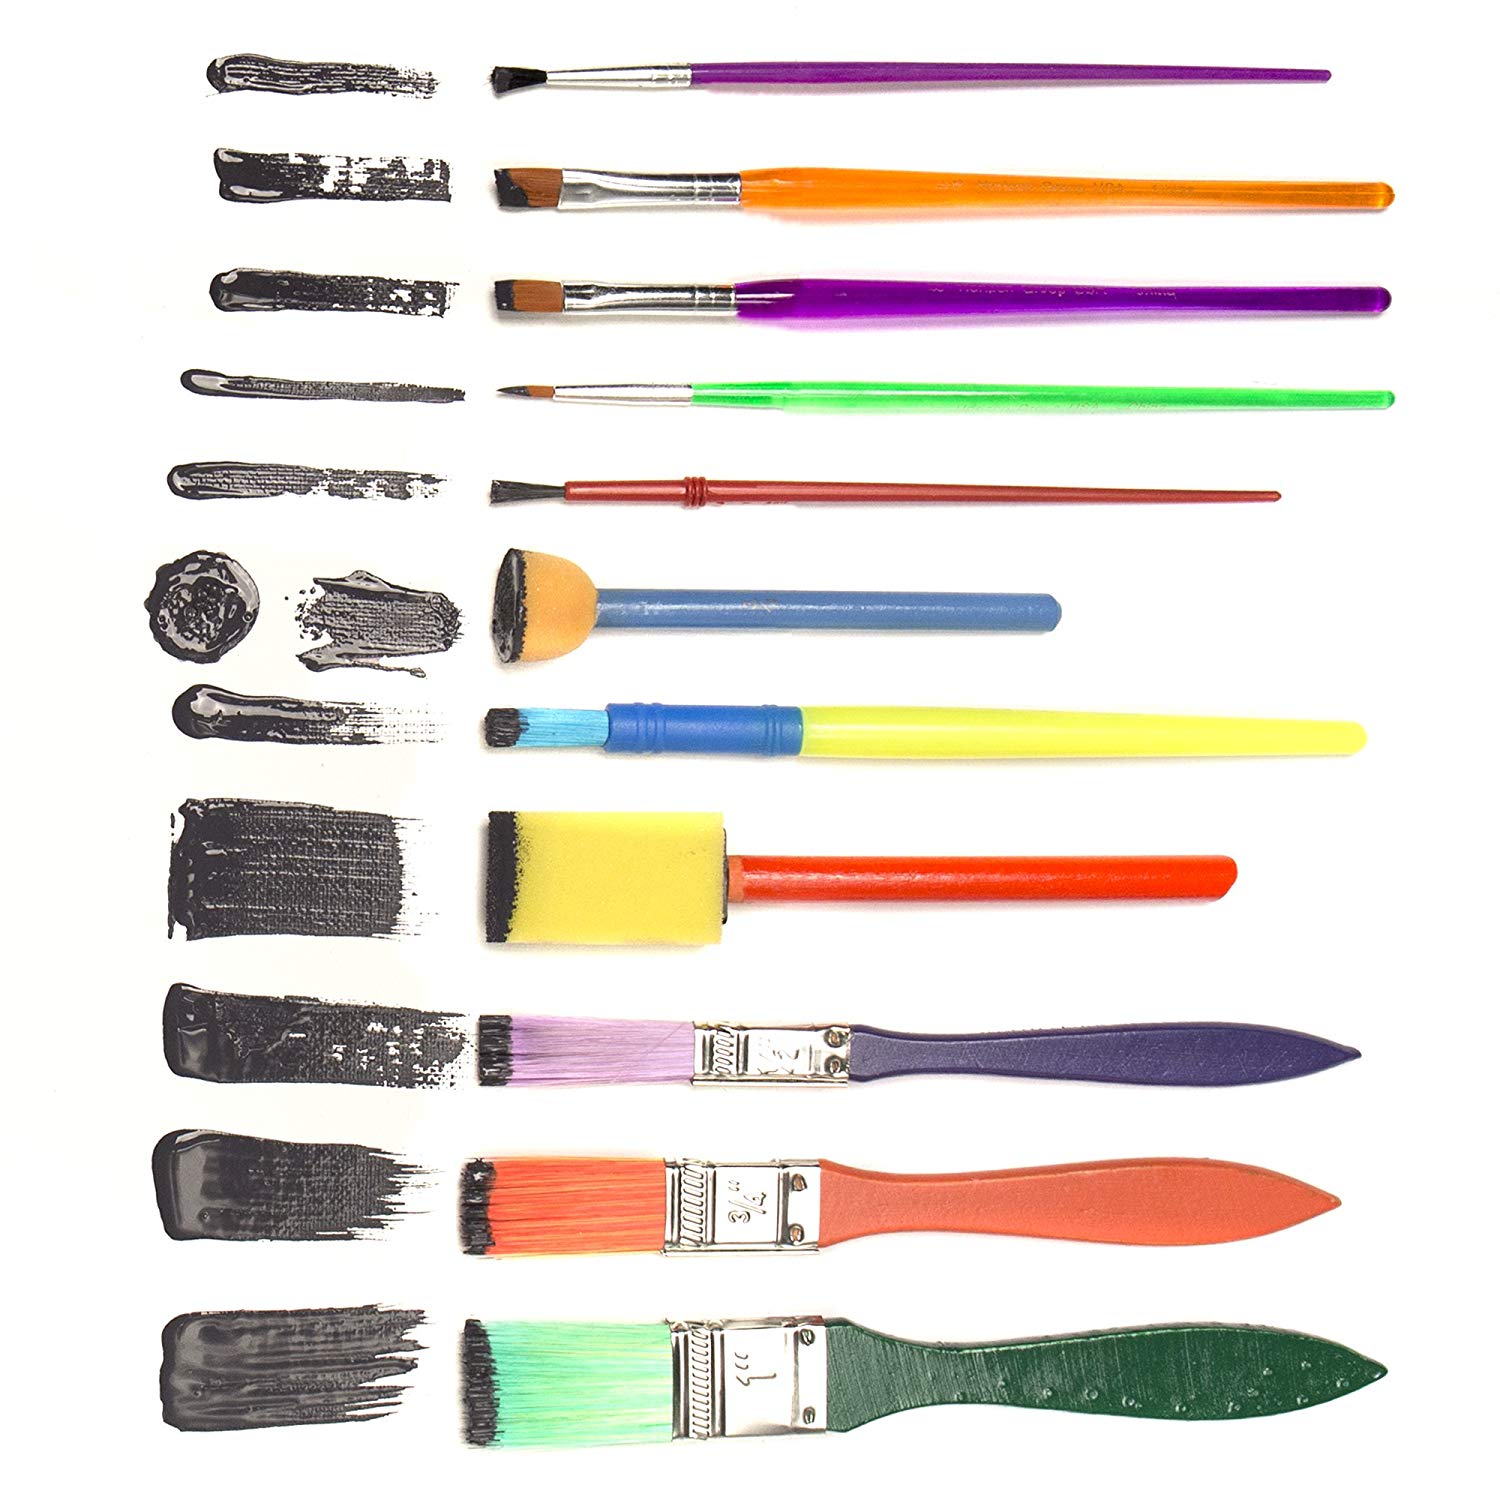 Go Create Assorted Paint Brushes, 25 ct. - image 3 of 5